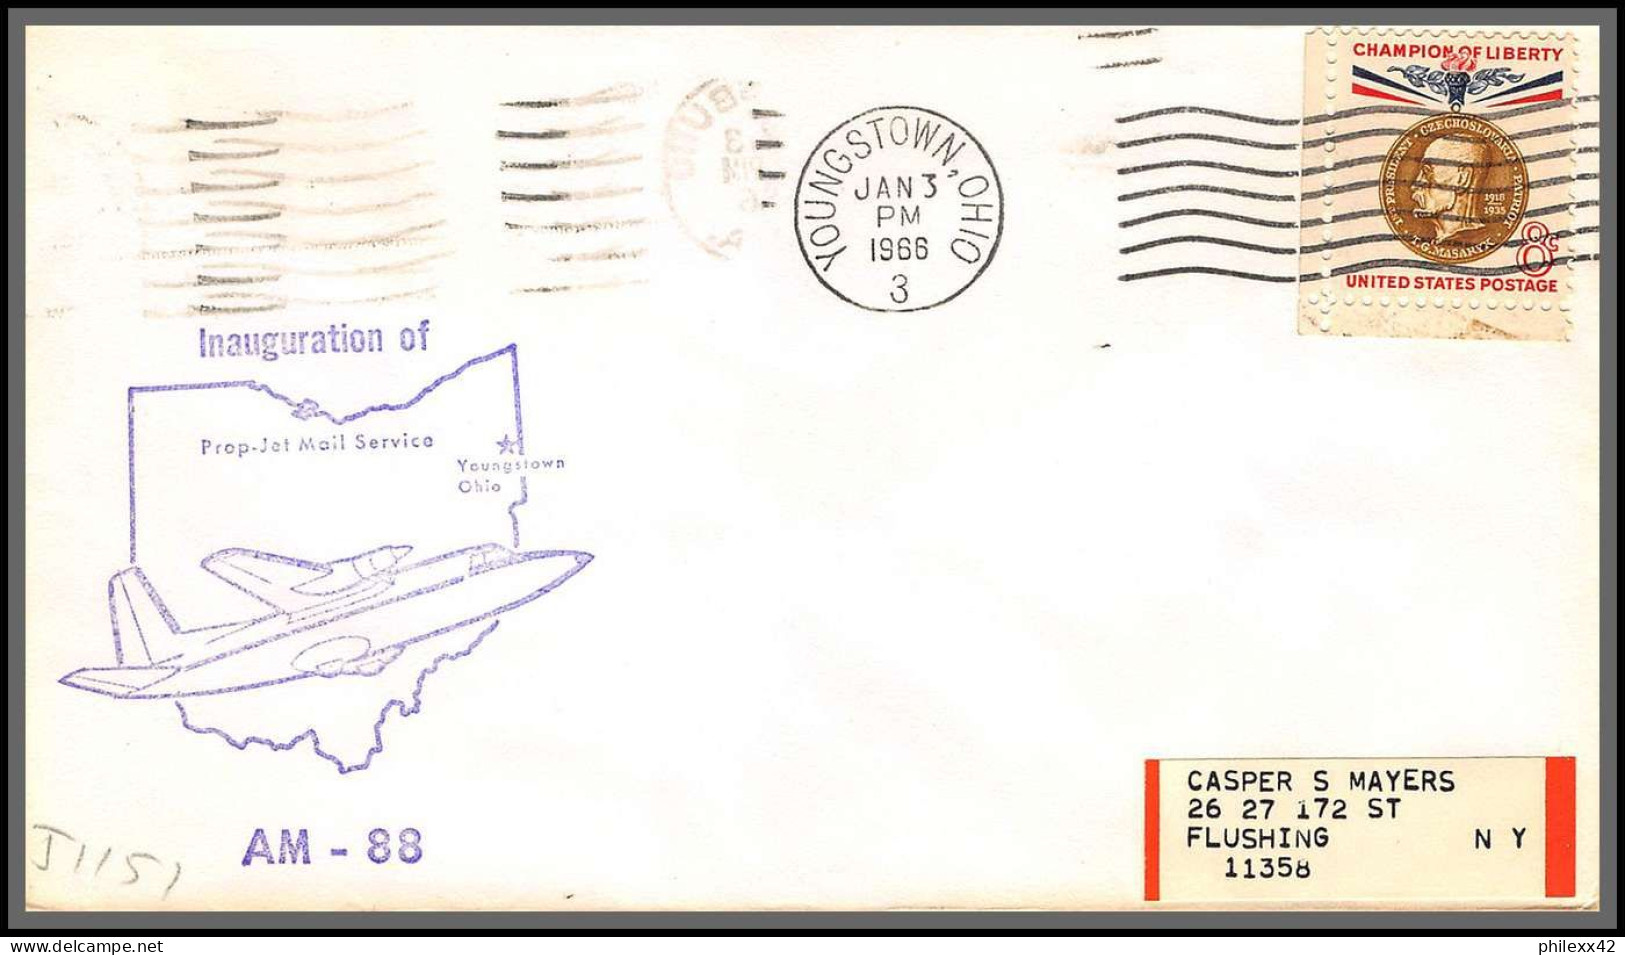 12437 Am 88 Inauguration Prop Jet Mail Service Youngstown 3/1/1966 Premier Vol First Flight Lettre Airmail Cover Usa  - 3c. 1961-... Lettres